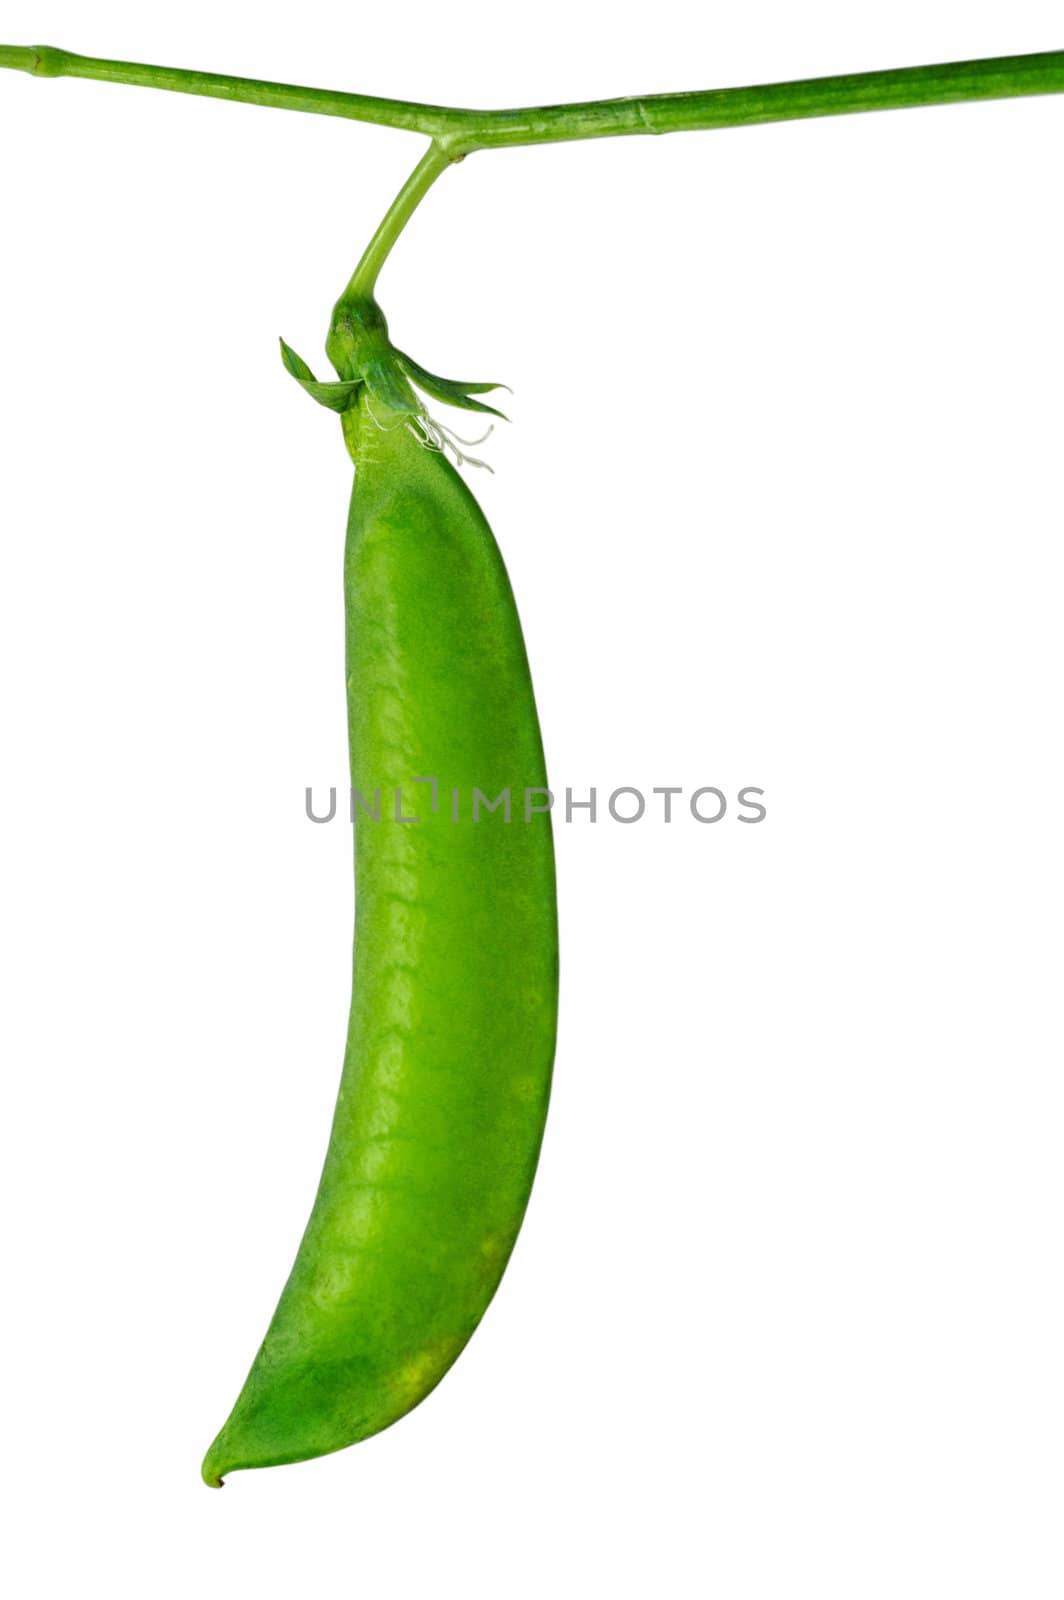 Pea pod with clipping path by Laborer